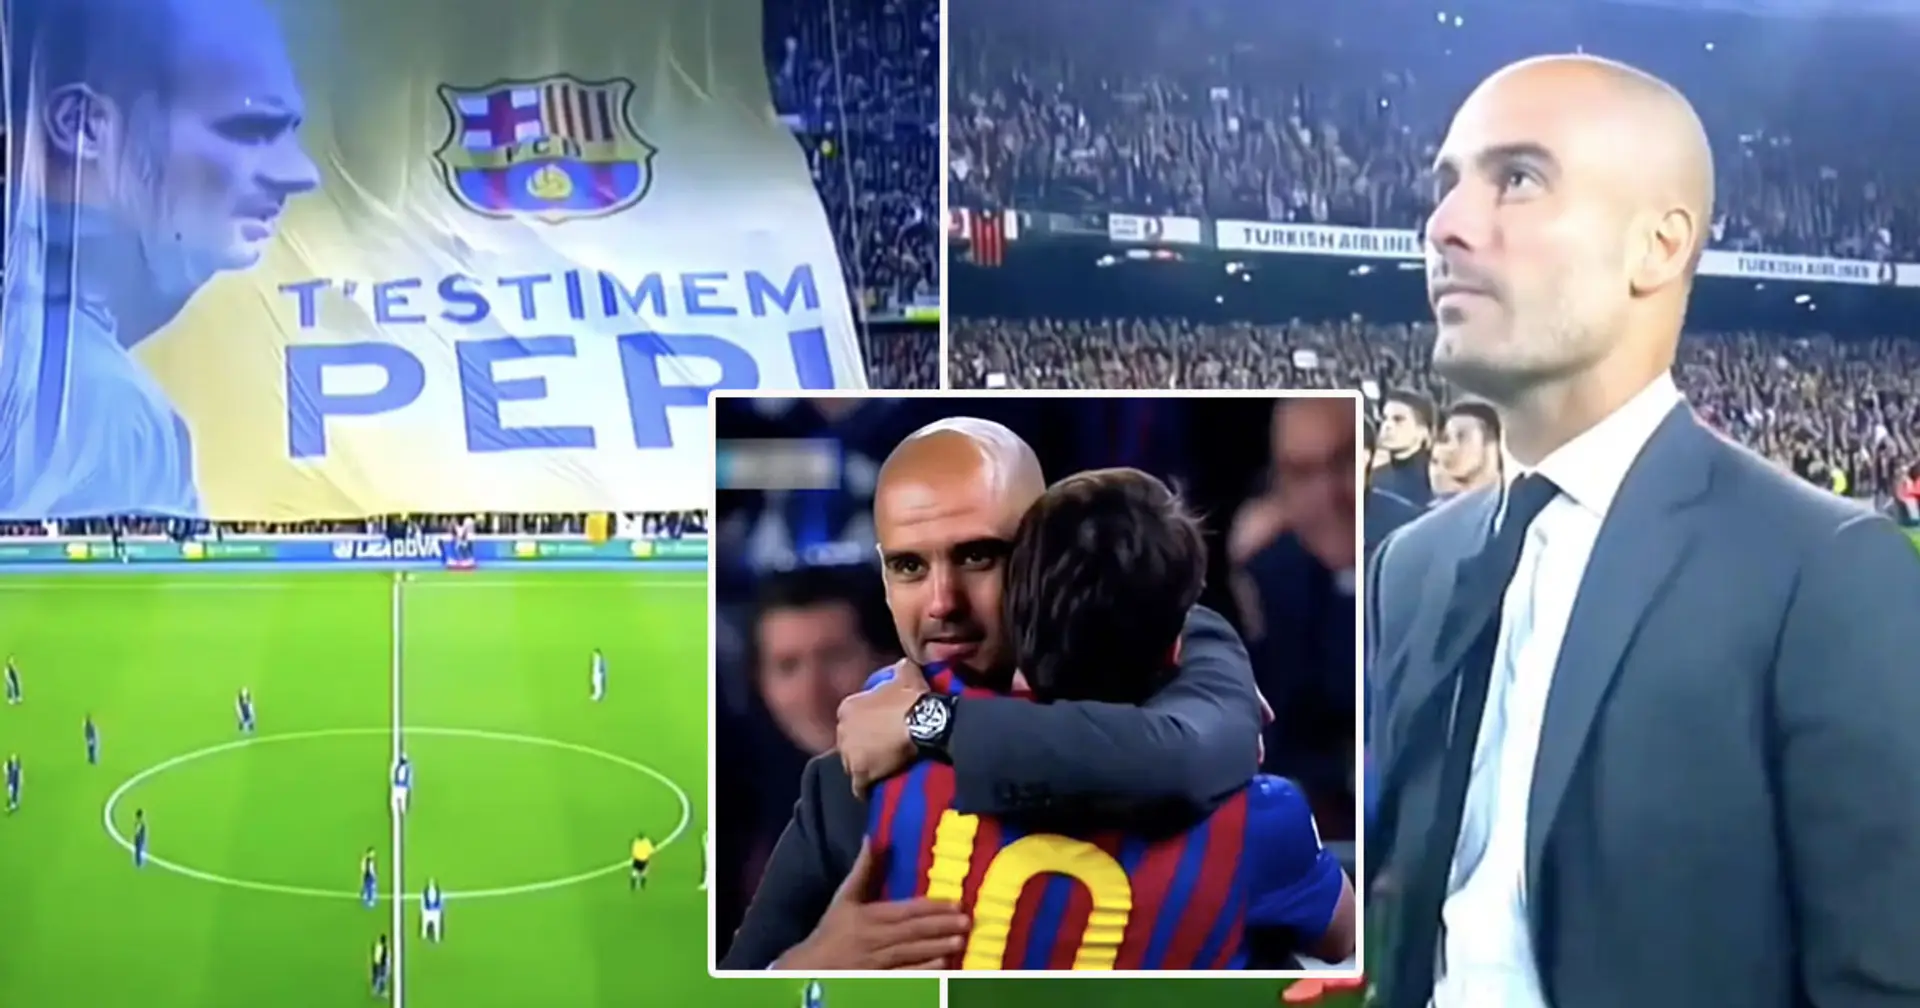 Messi scored four: Pep Guardiola's last home game as Barca boss at Camp Nou